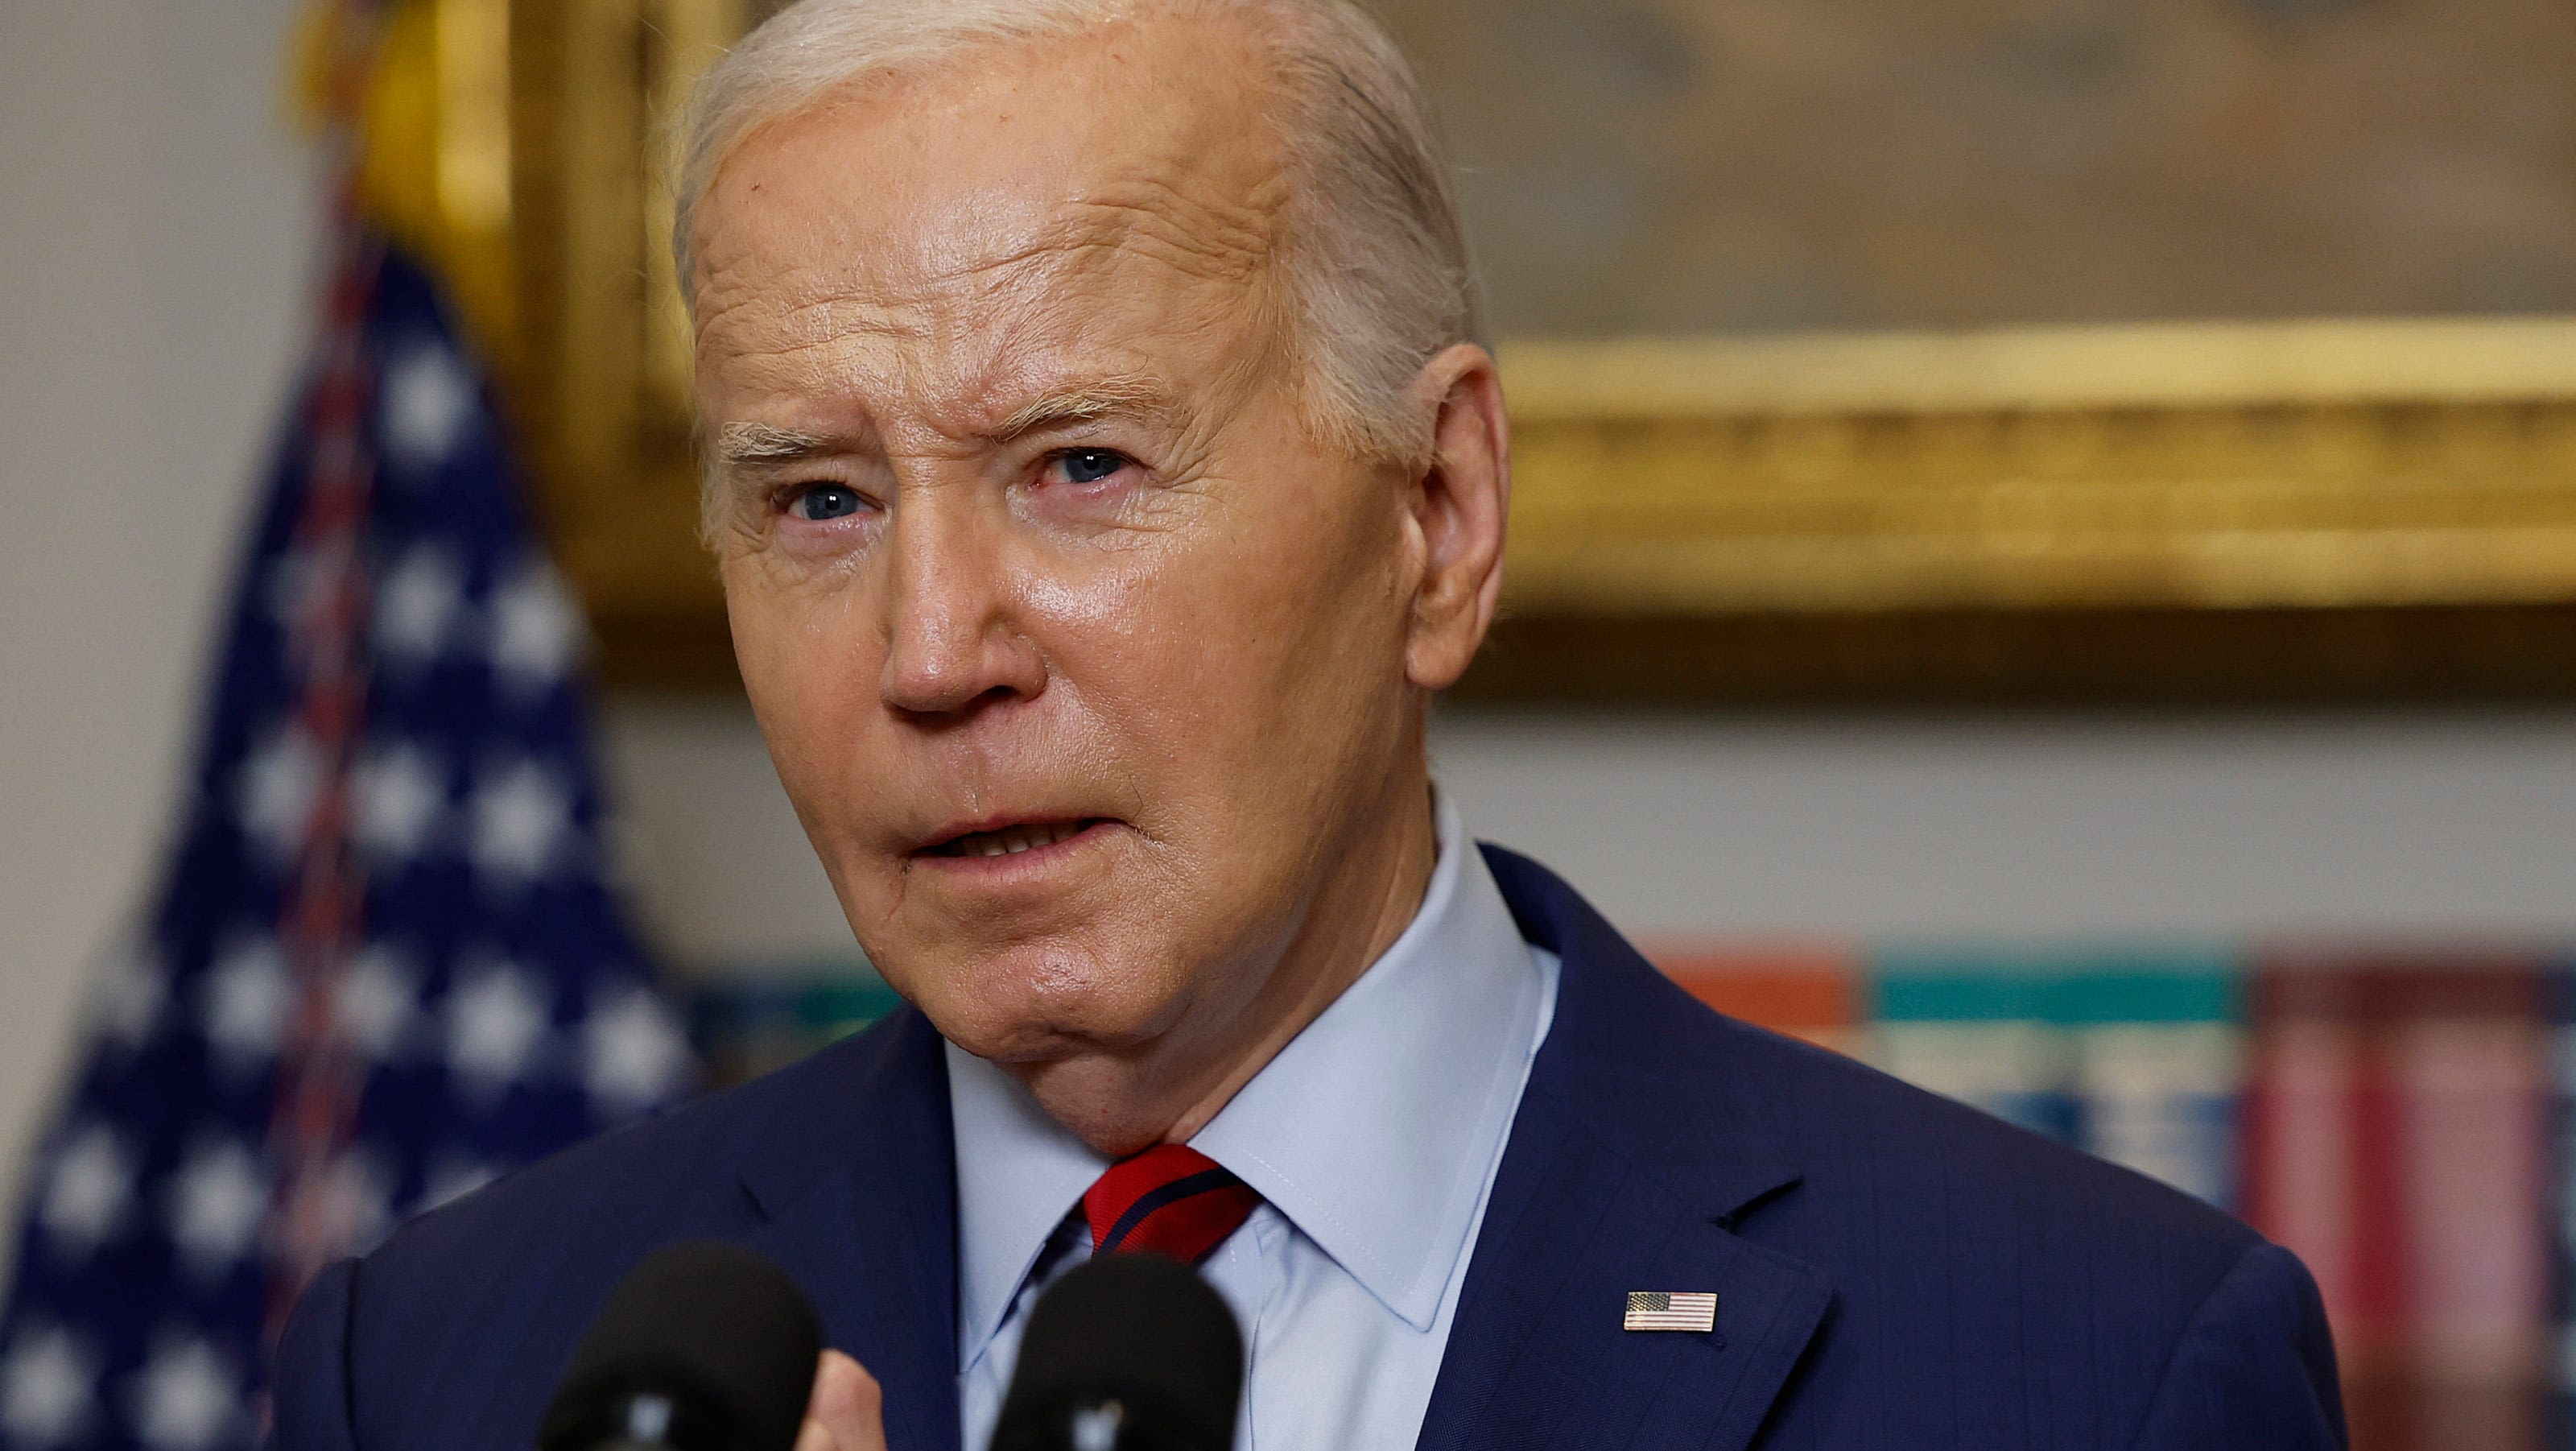 Biden campaign targets Trump in Arizona over Affordable Care Act. Here's what to know